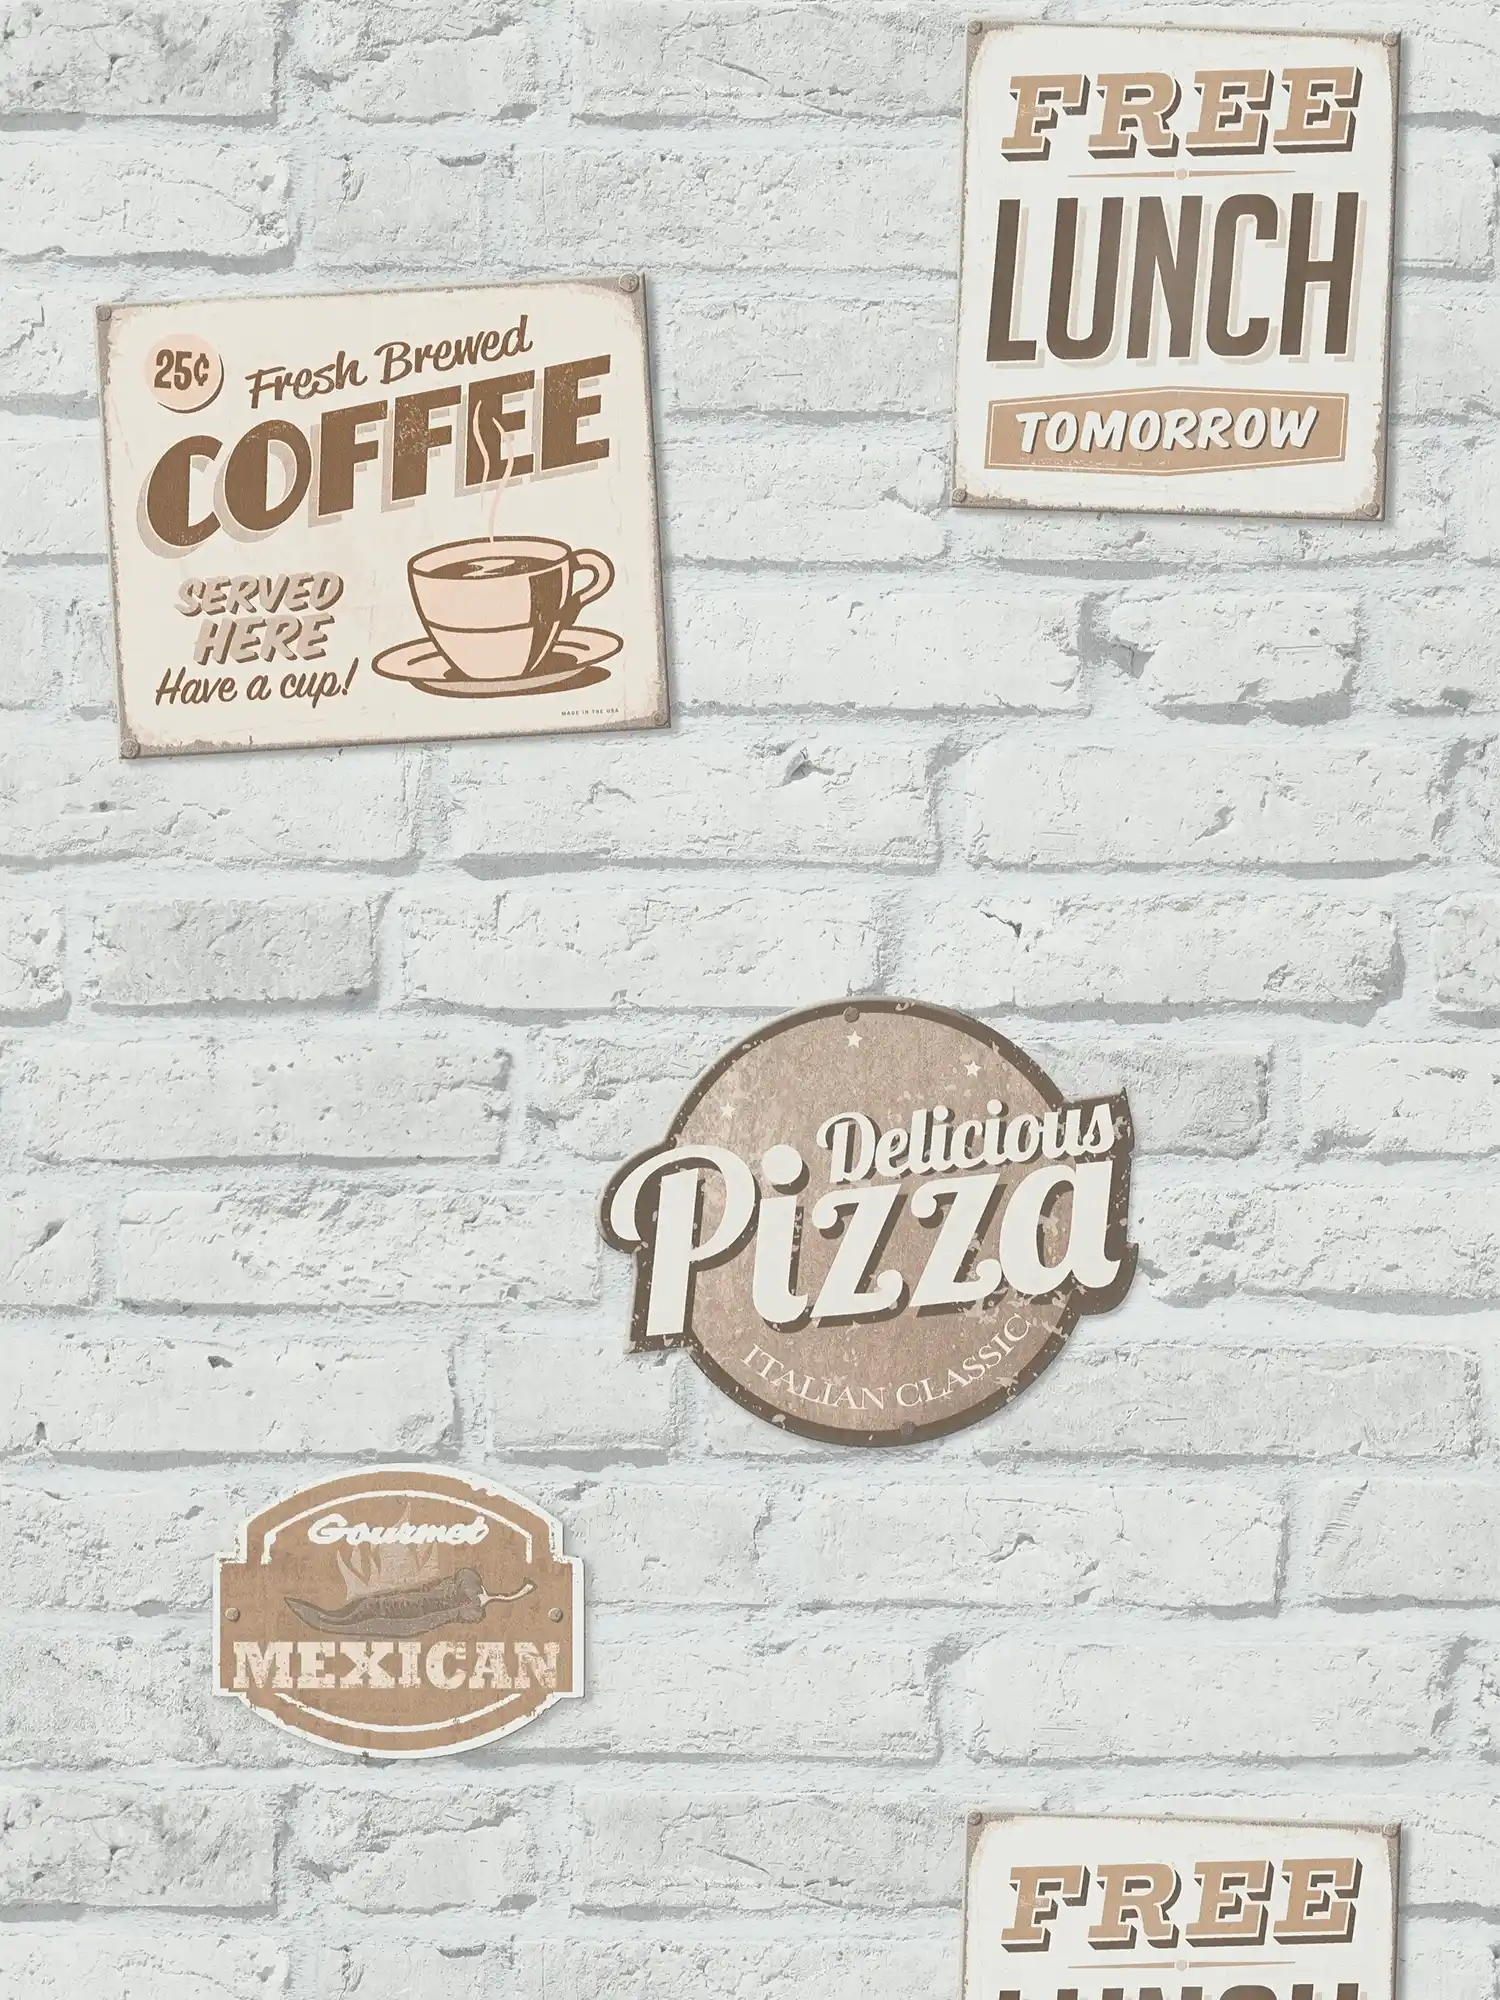 Self-adhesive wallpaper | White brick wall with advertising signs
